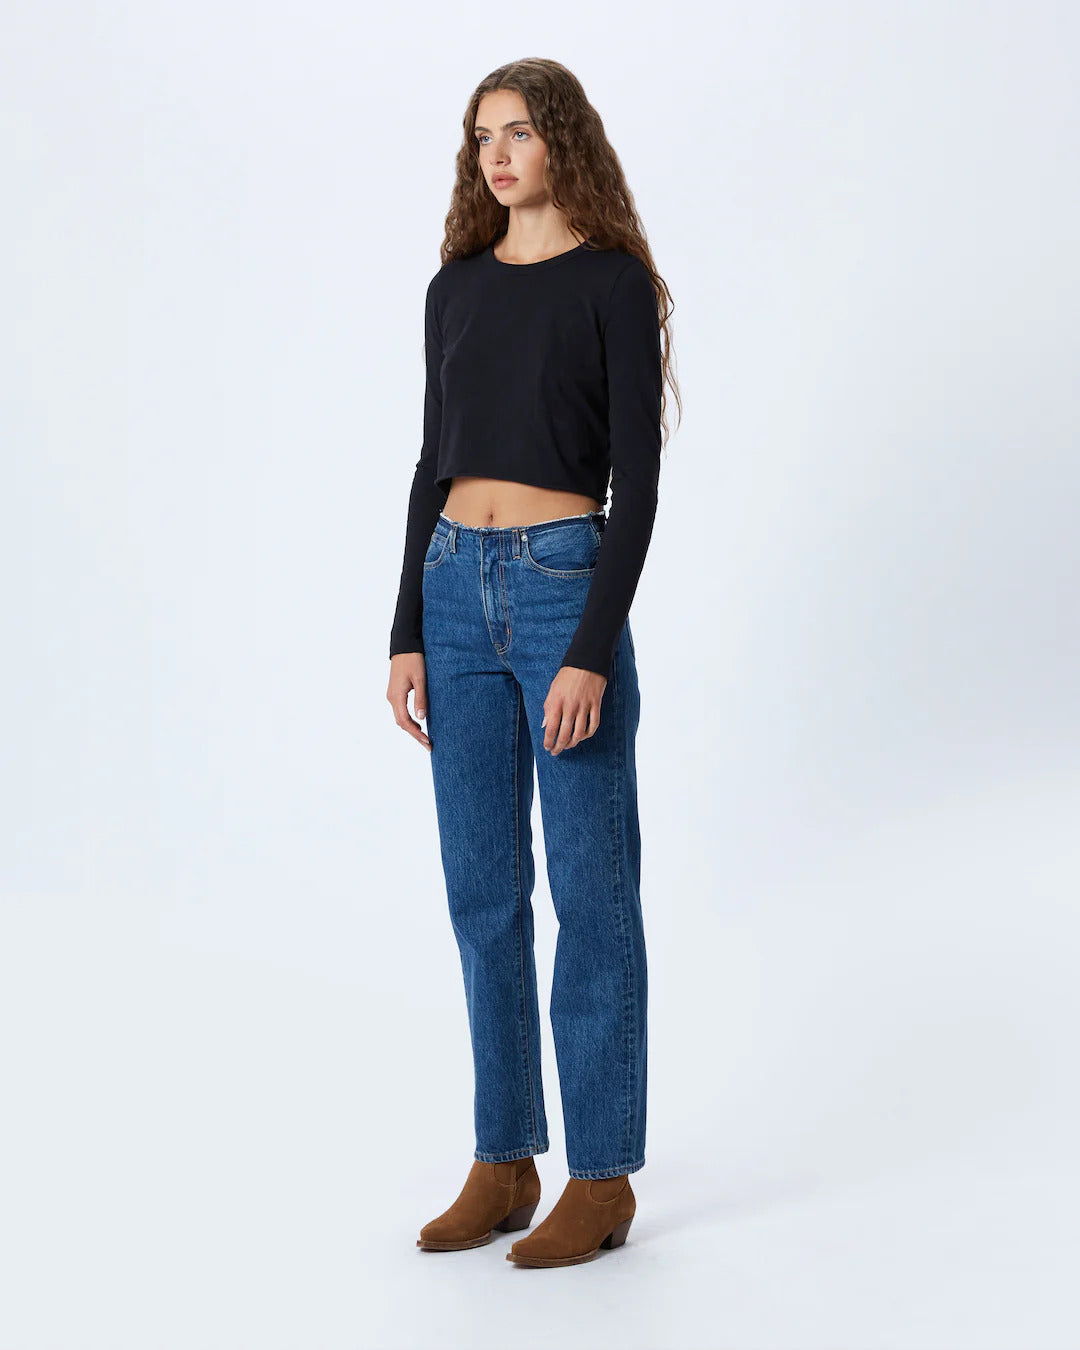 Slvrlake London No Waistband Jean in Claremont available at TNT The New Trend Australia